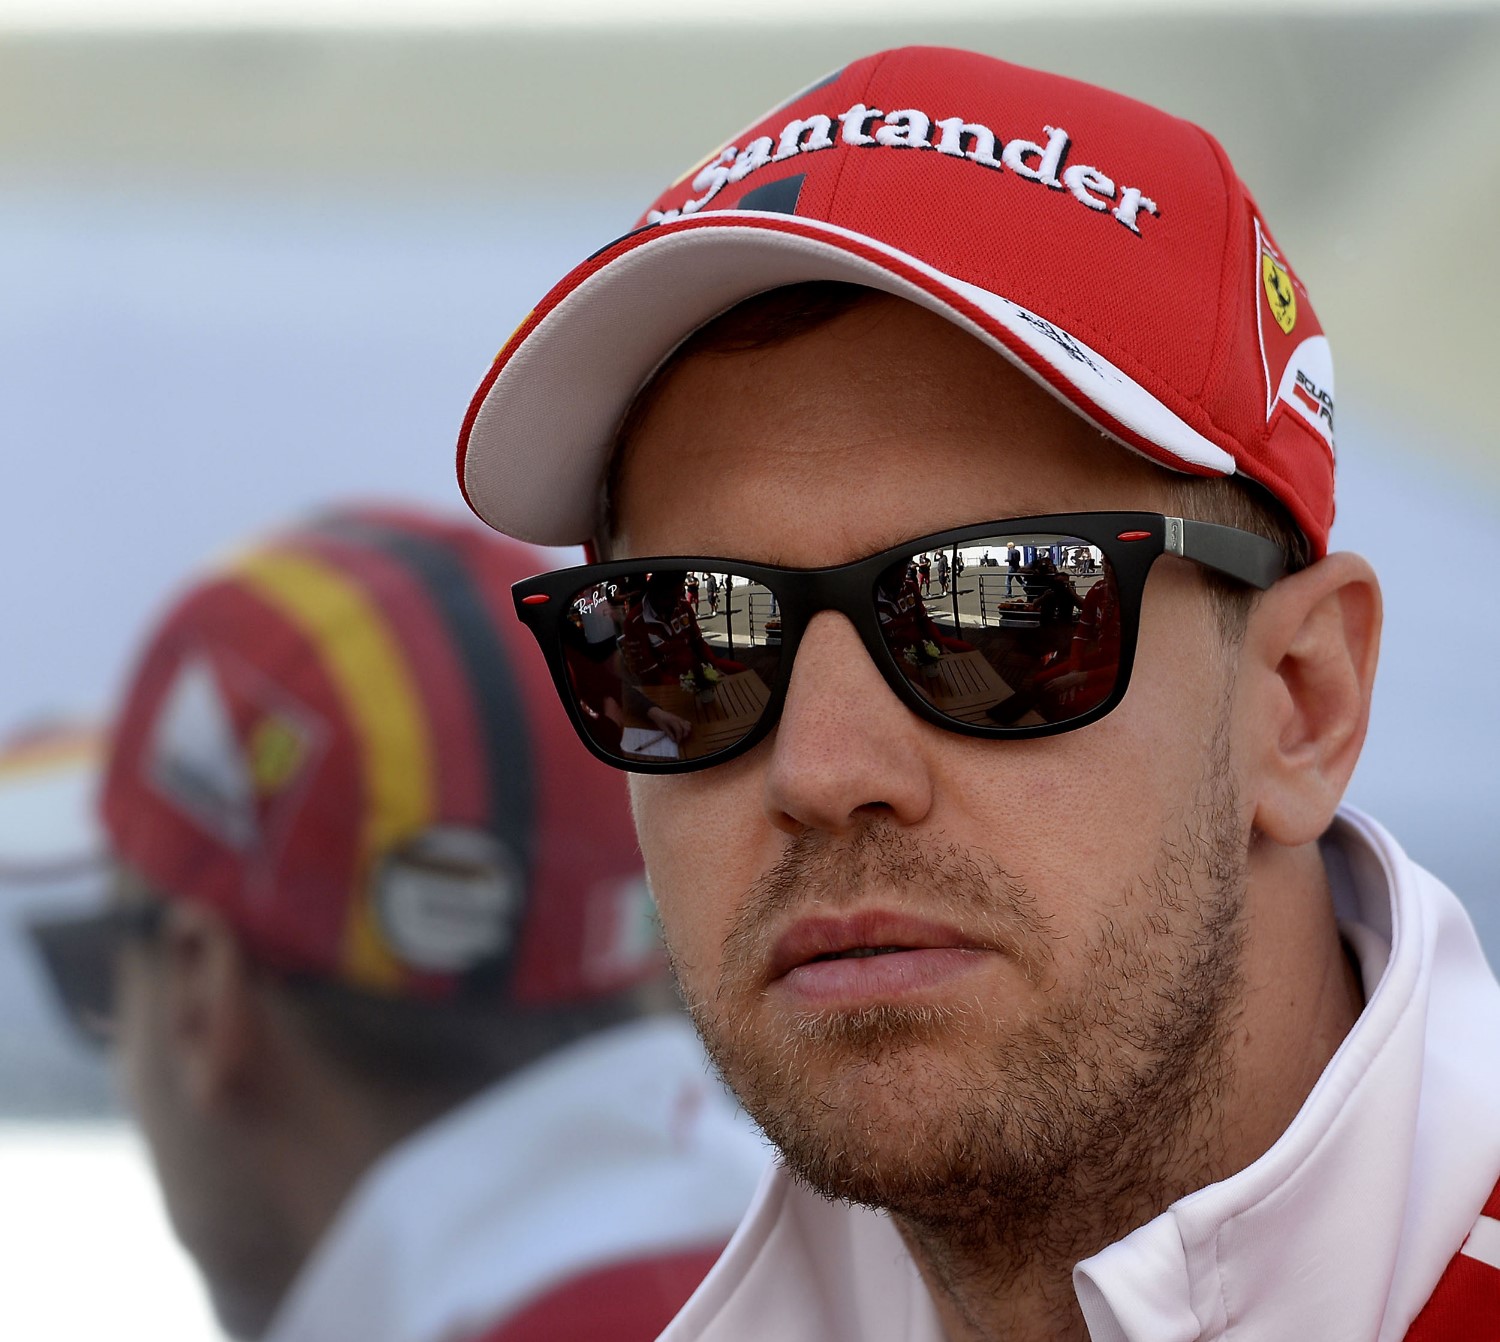 Vettel can only dream of beating Hamilton. Ferrari will have to steal Aldo Costa back